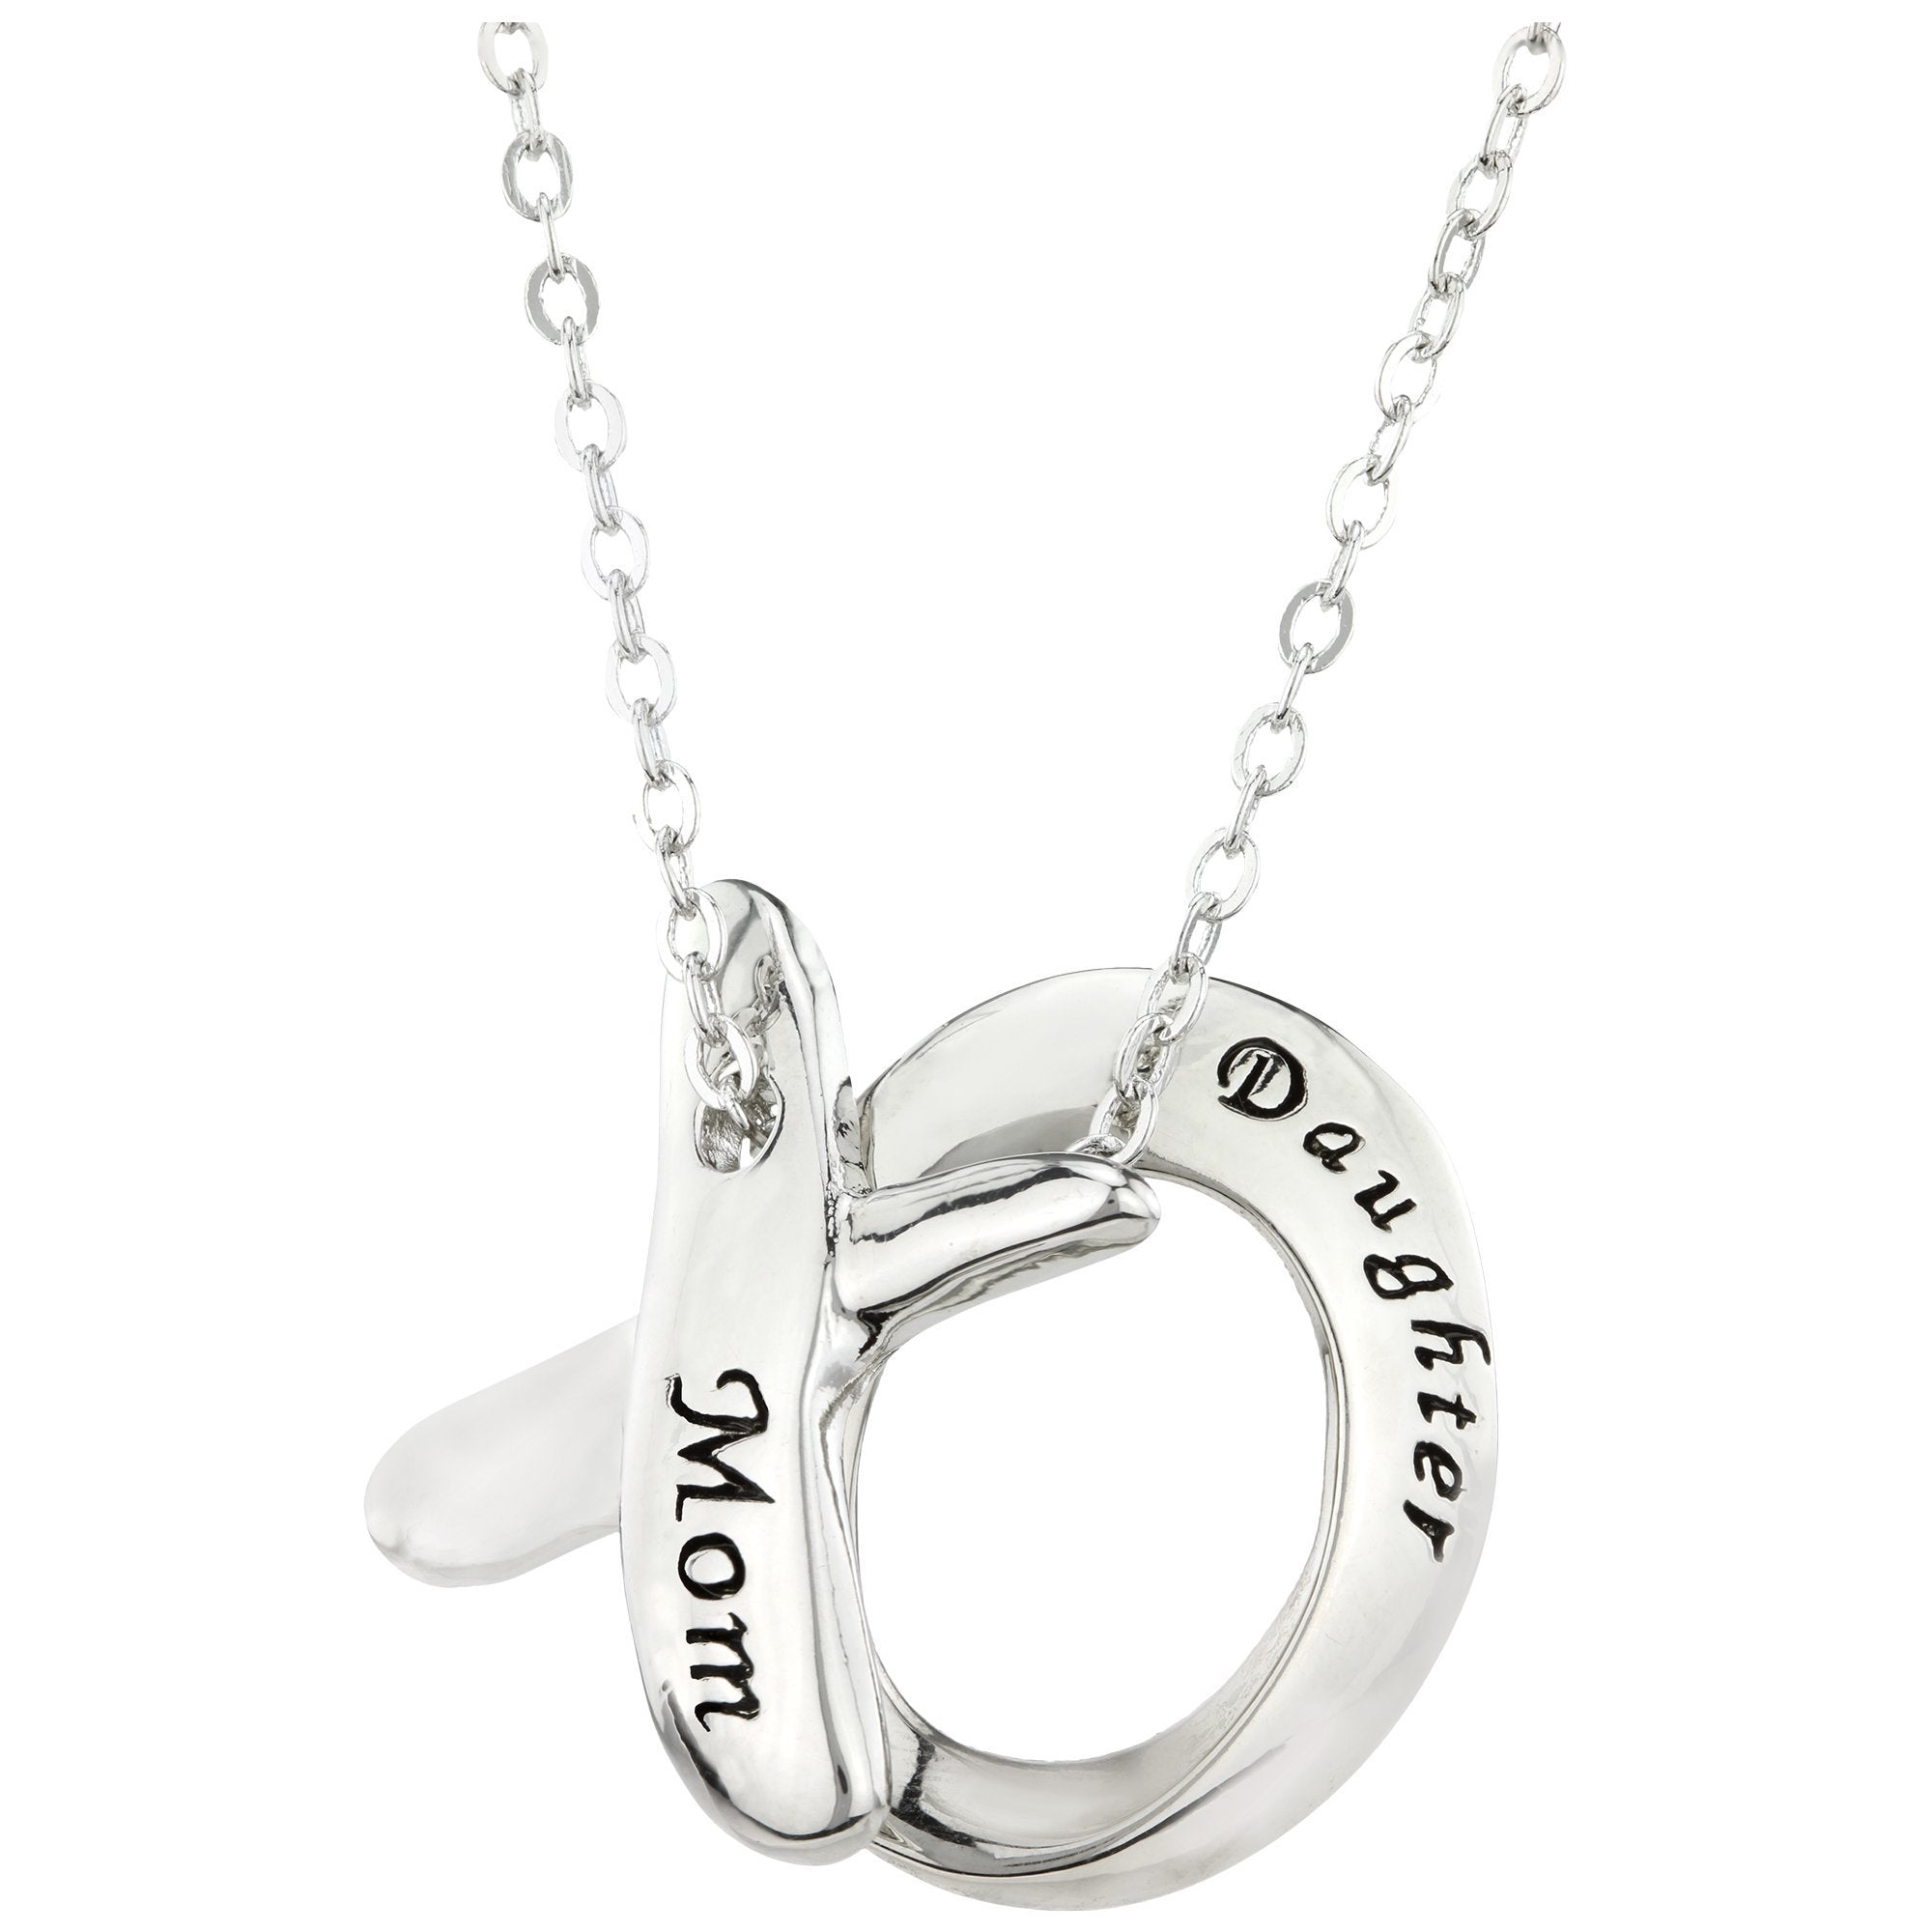 XO Mother Daughter Necklace - Set Of 2